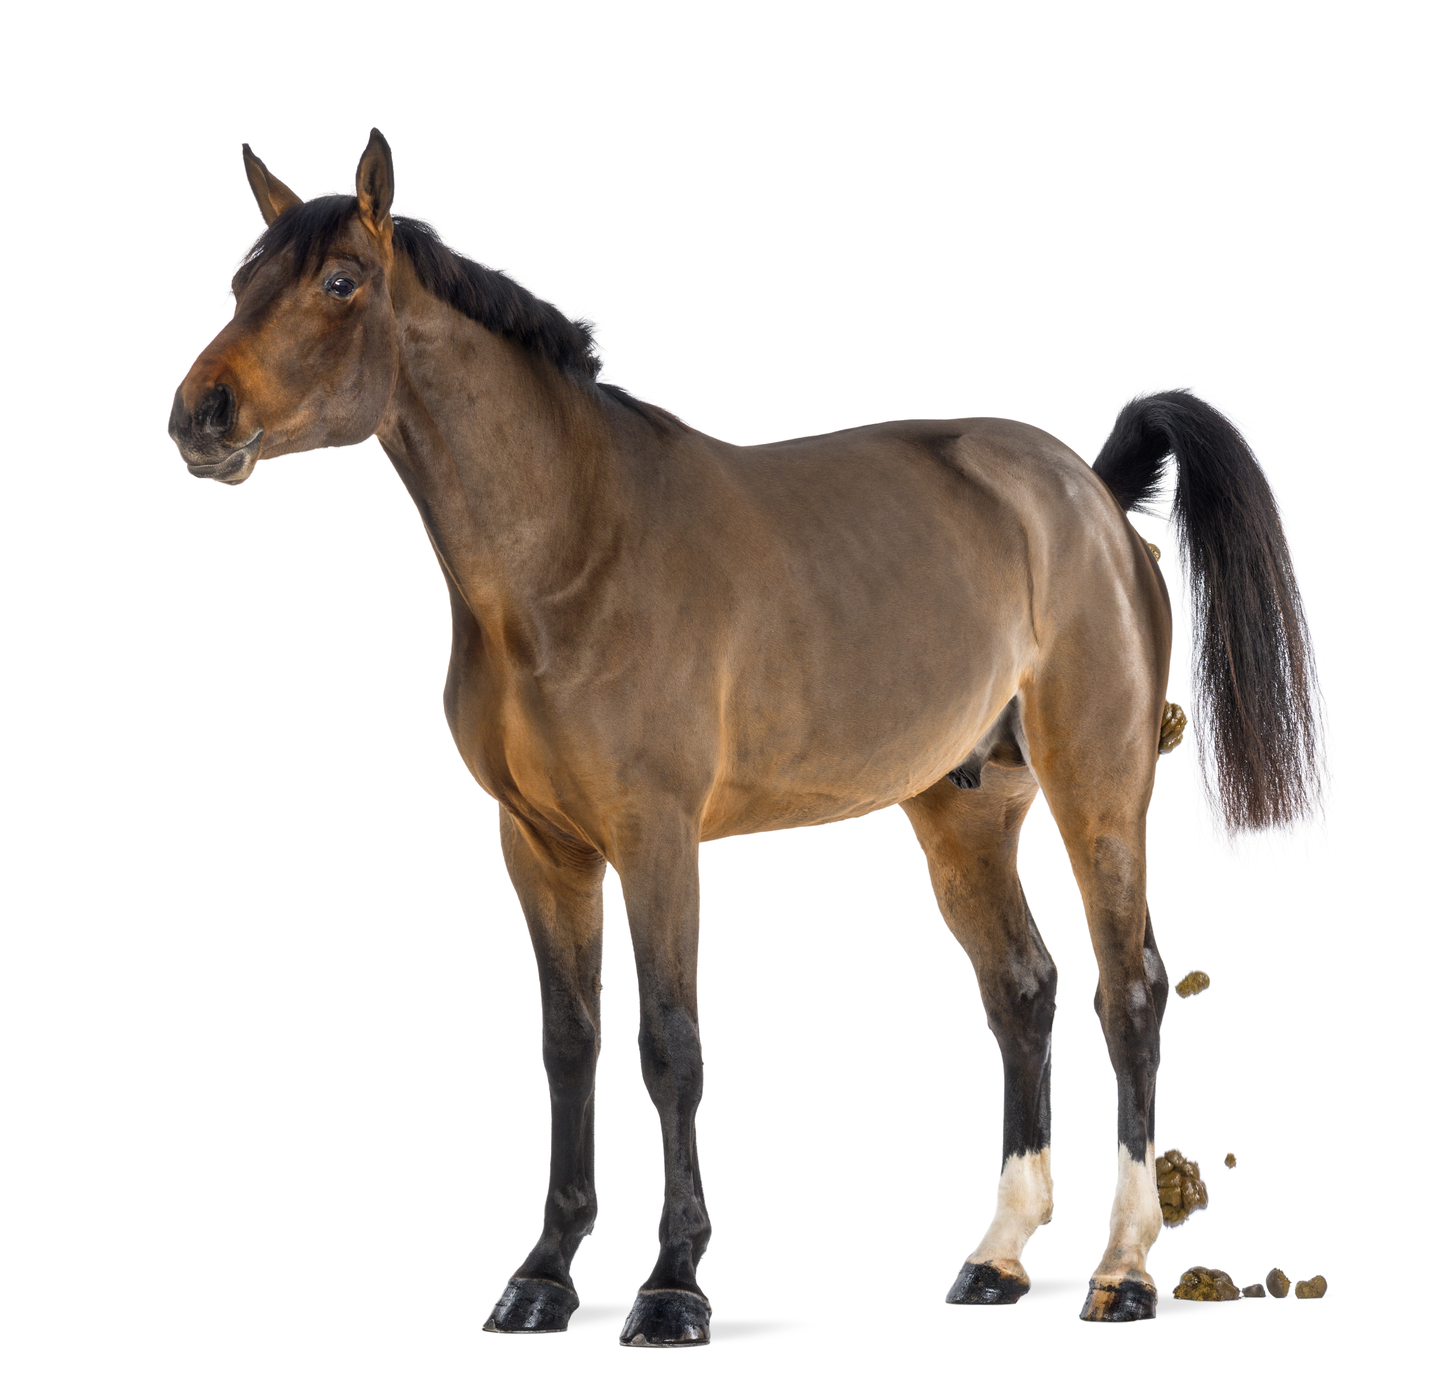 Male Belgian Warmblood, BWP, 3 years old, defecating against white background